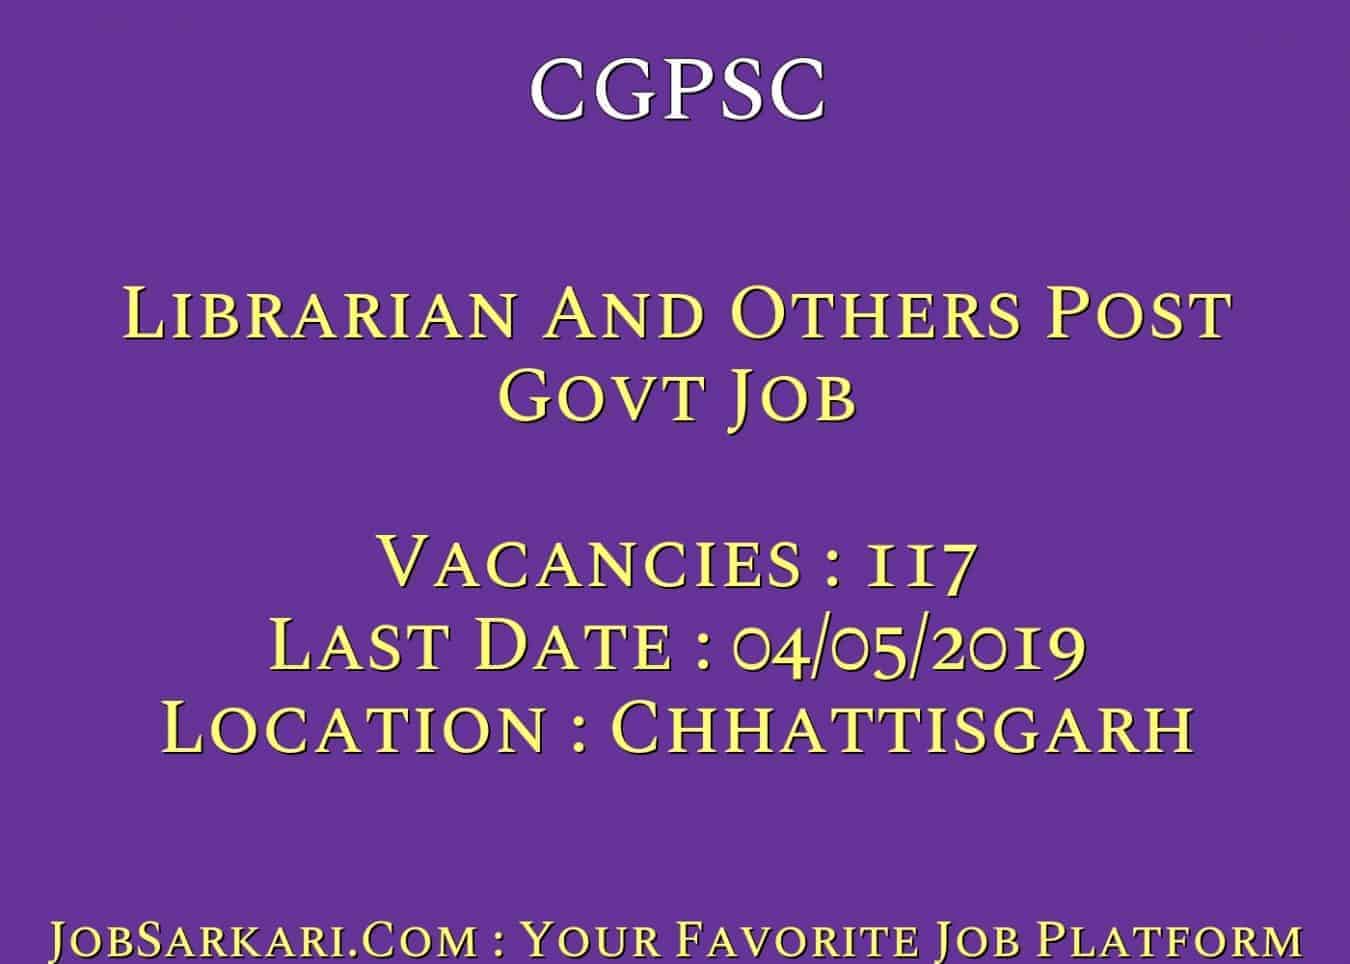 CGPSC Recruitment 2019 For Librarian And Others Post Govt Job